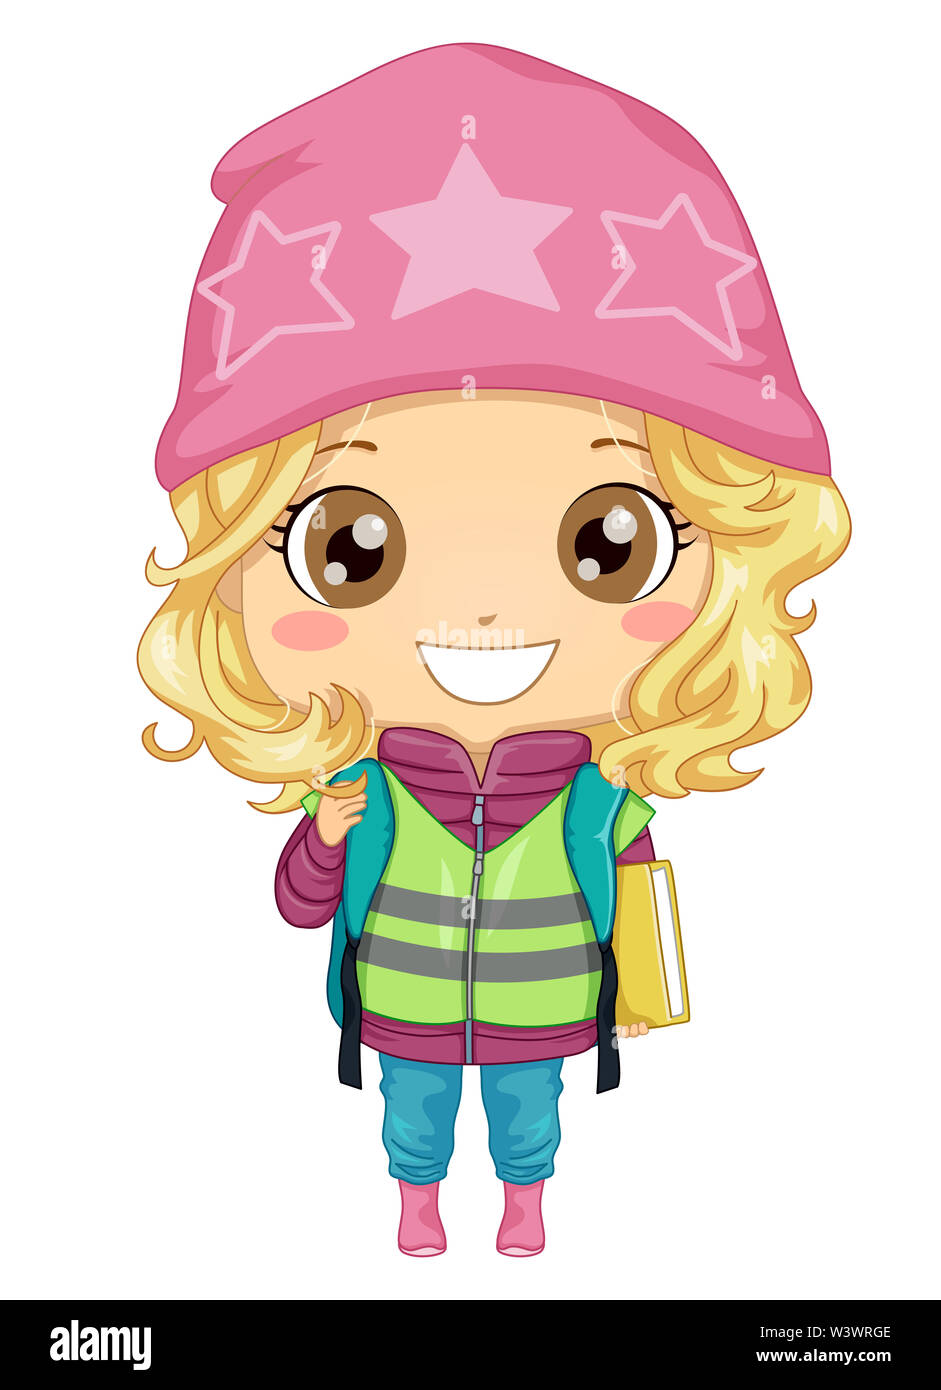 Illustration of a Swedish Kid Girl Student with Her Backpack and Book Stock Photo